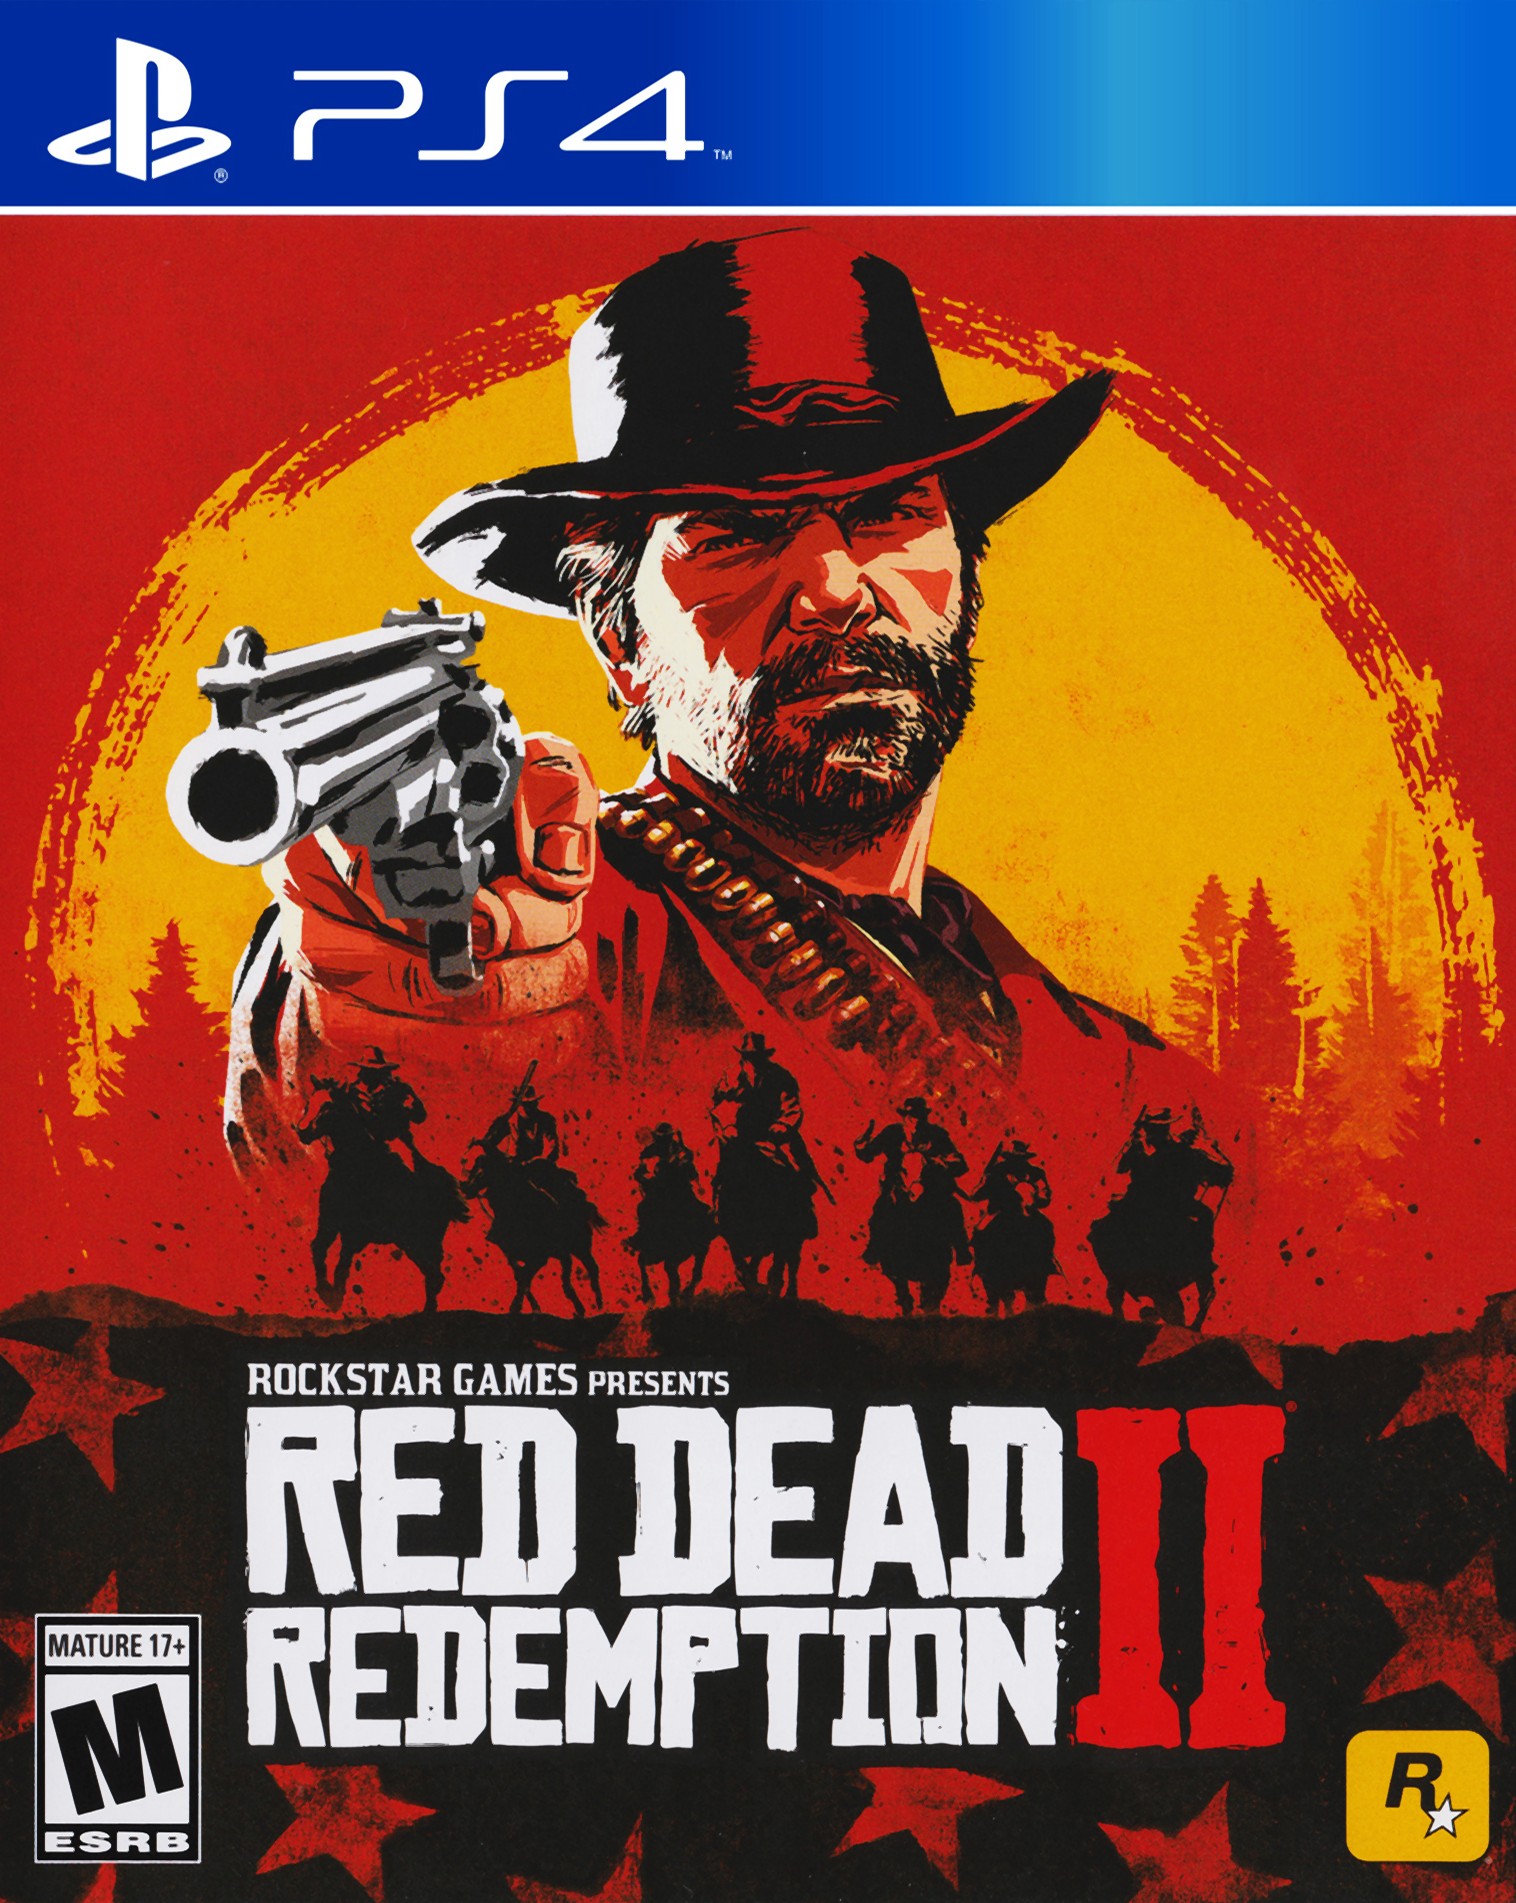 'Red Dead Redemption II'